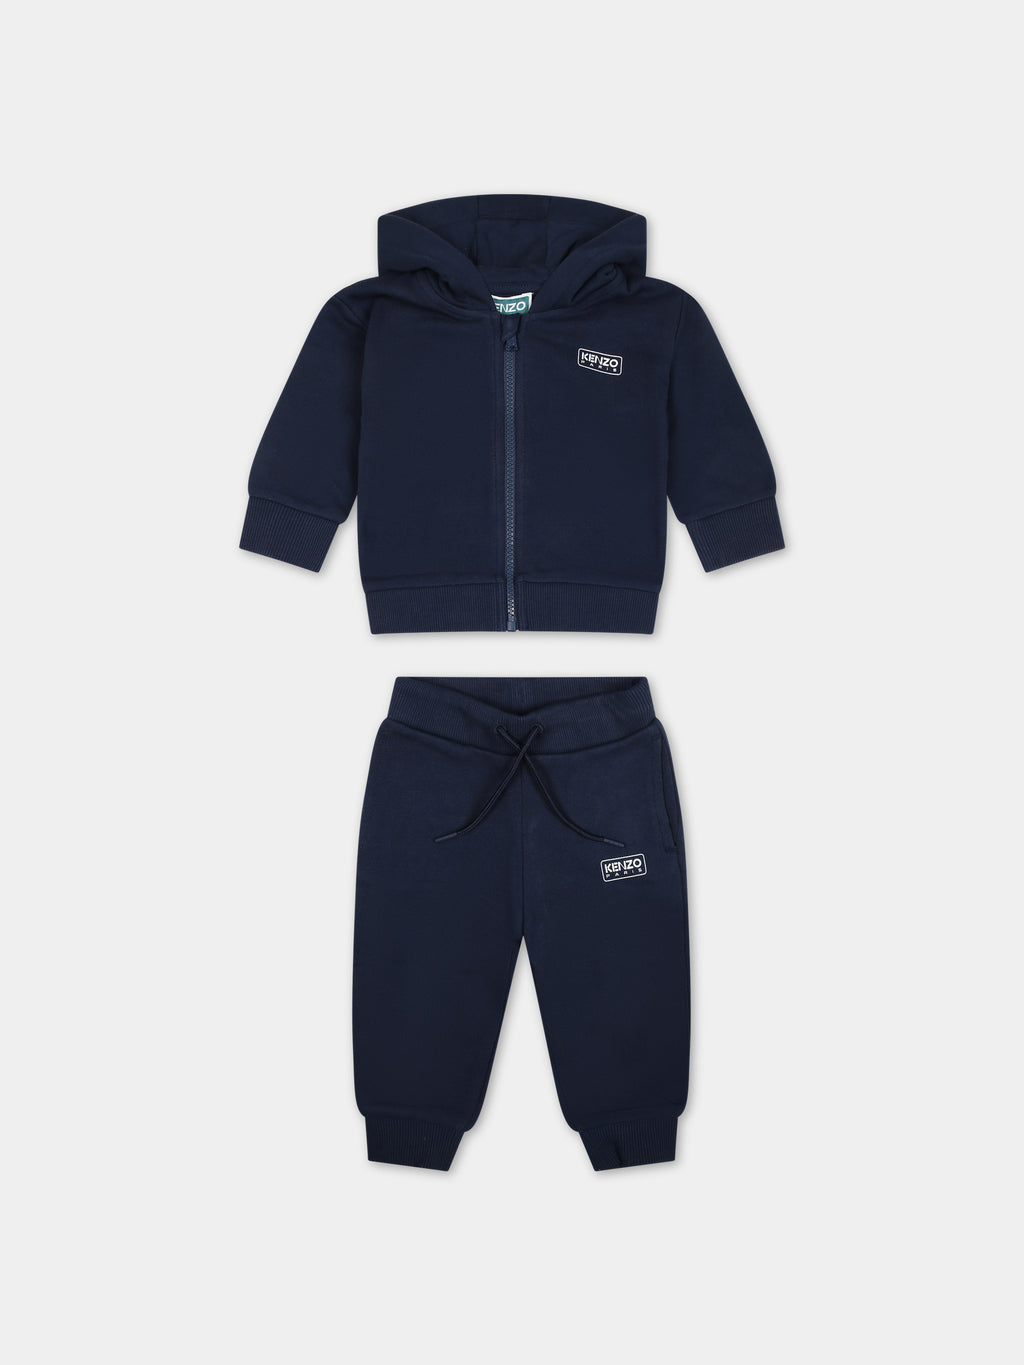 Blue sporty suit for baby boy with logo